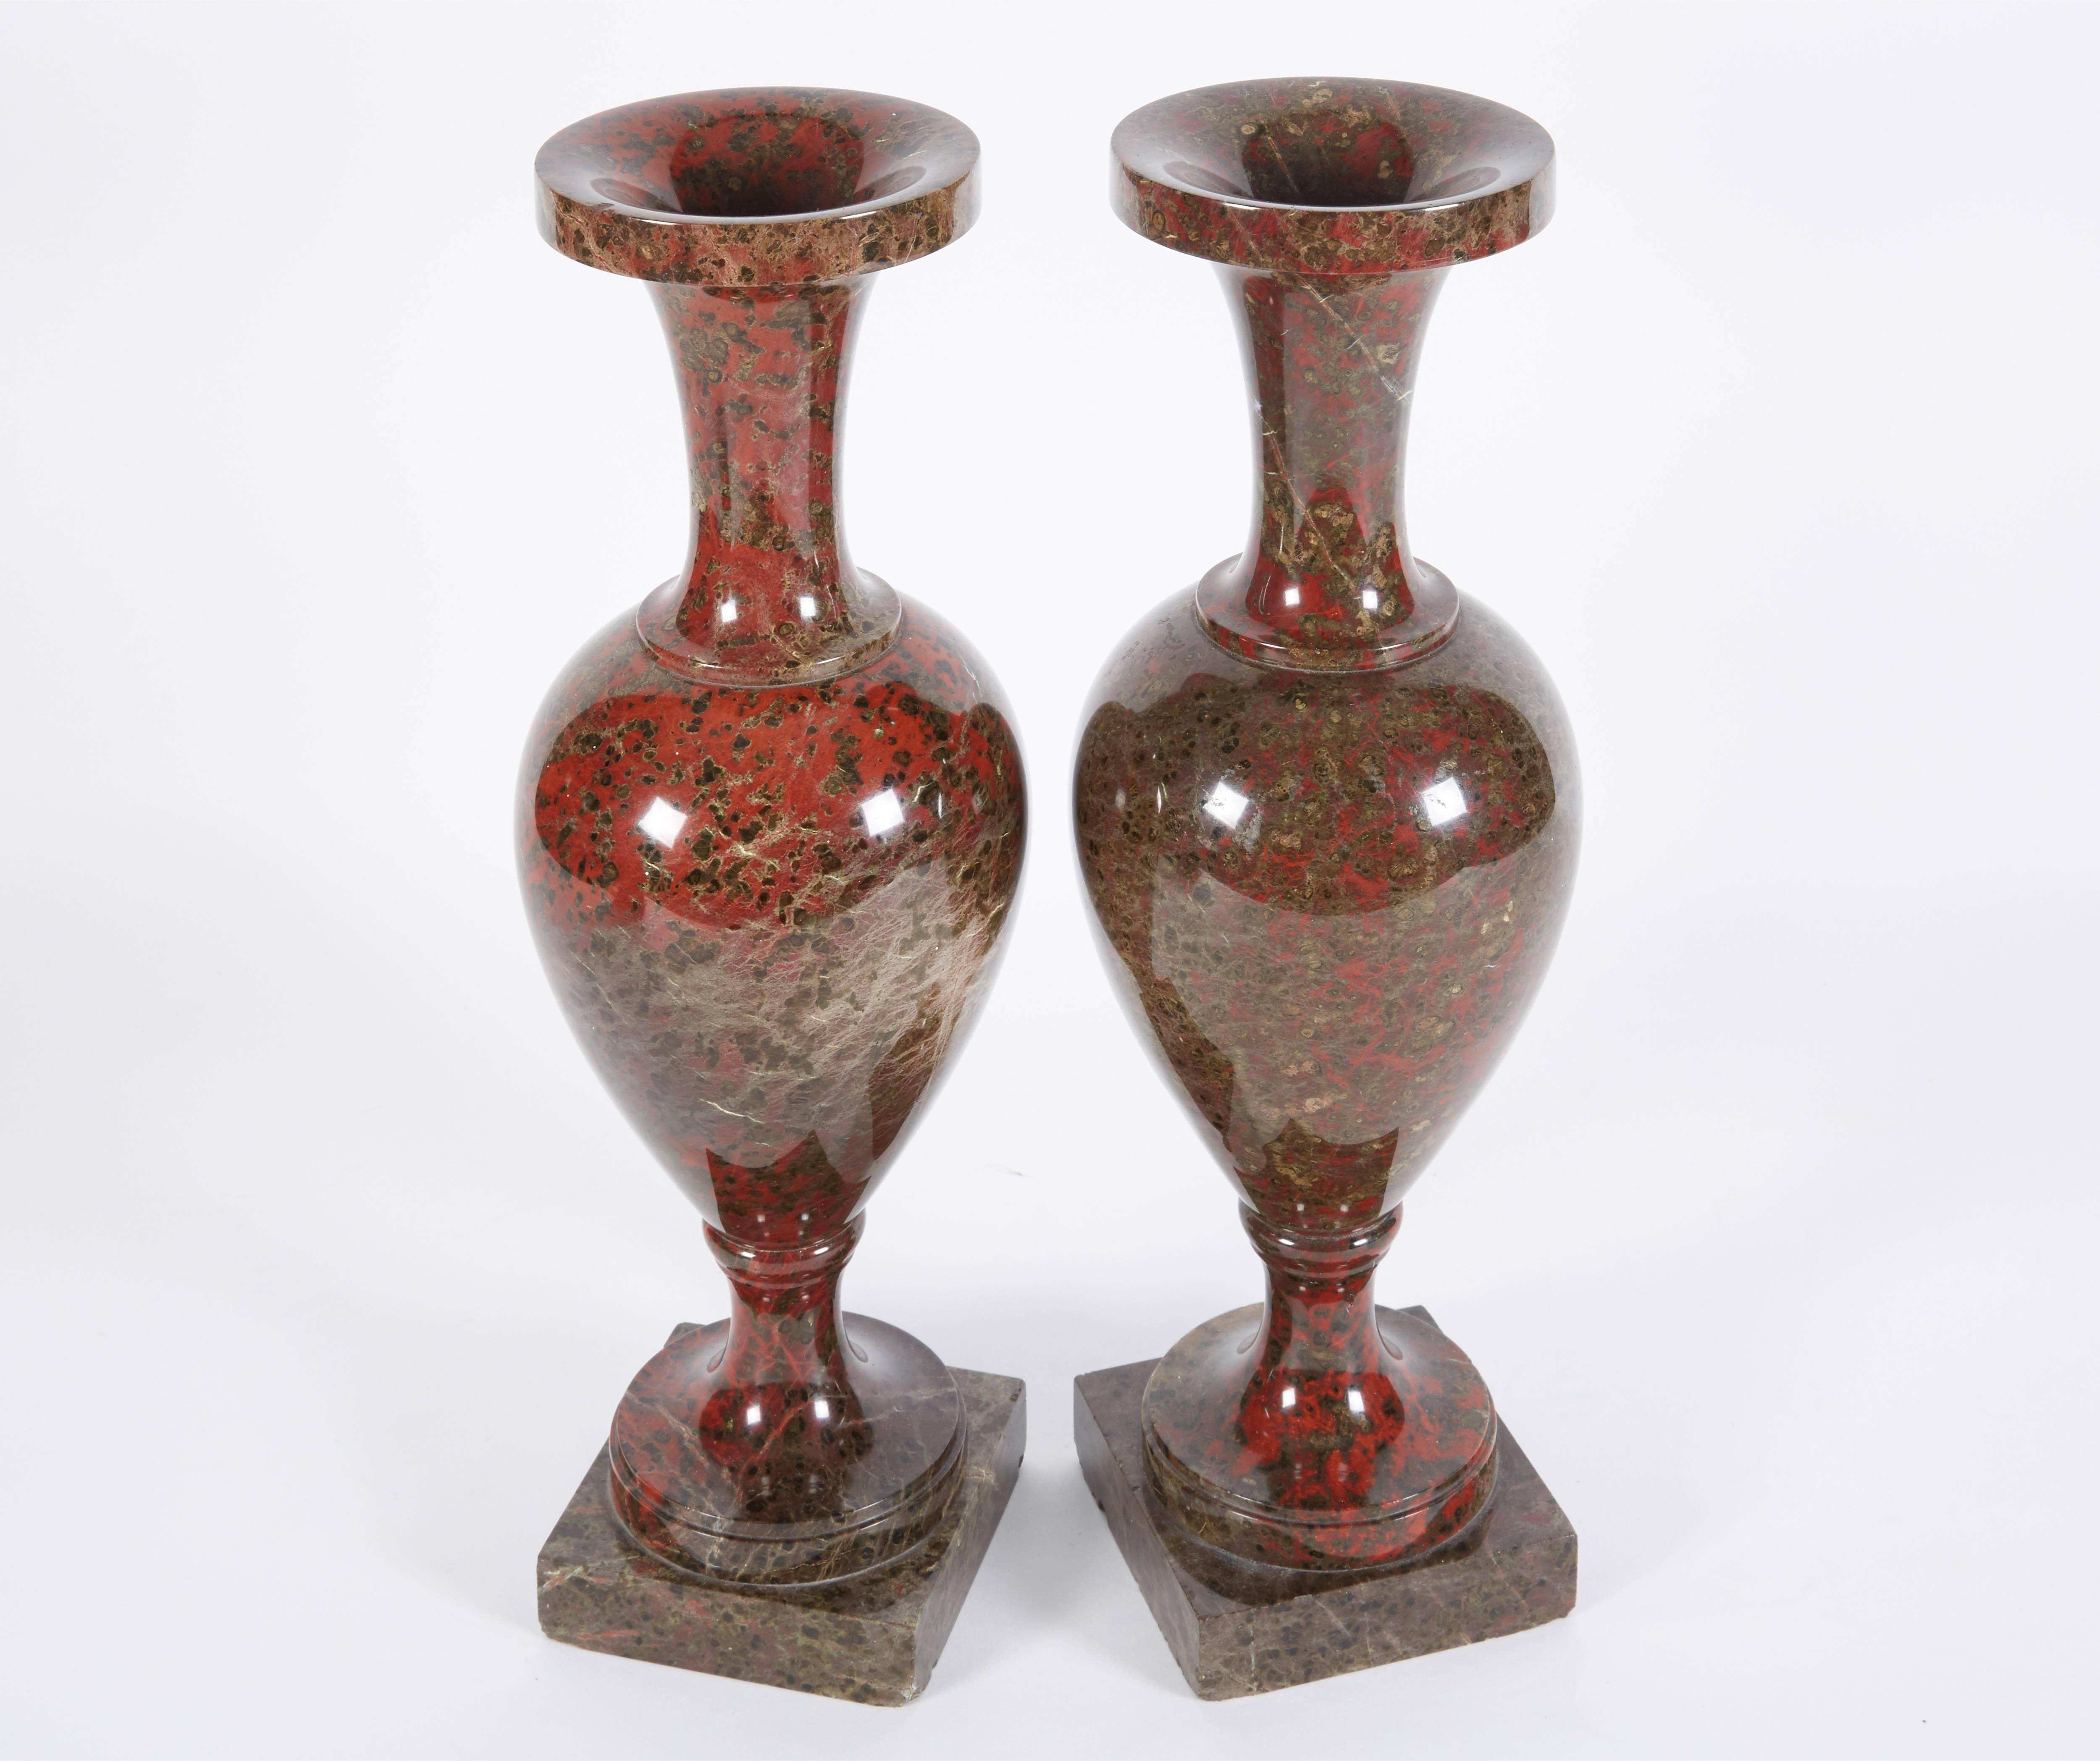 A Pair Of Neoclassical Lizard Serpentine Vases, Cornwall, England 19th century

Of baluster form. Very decorative.

14.5